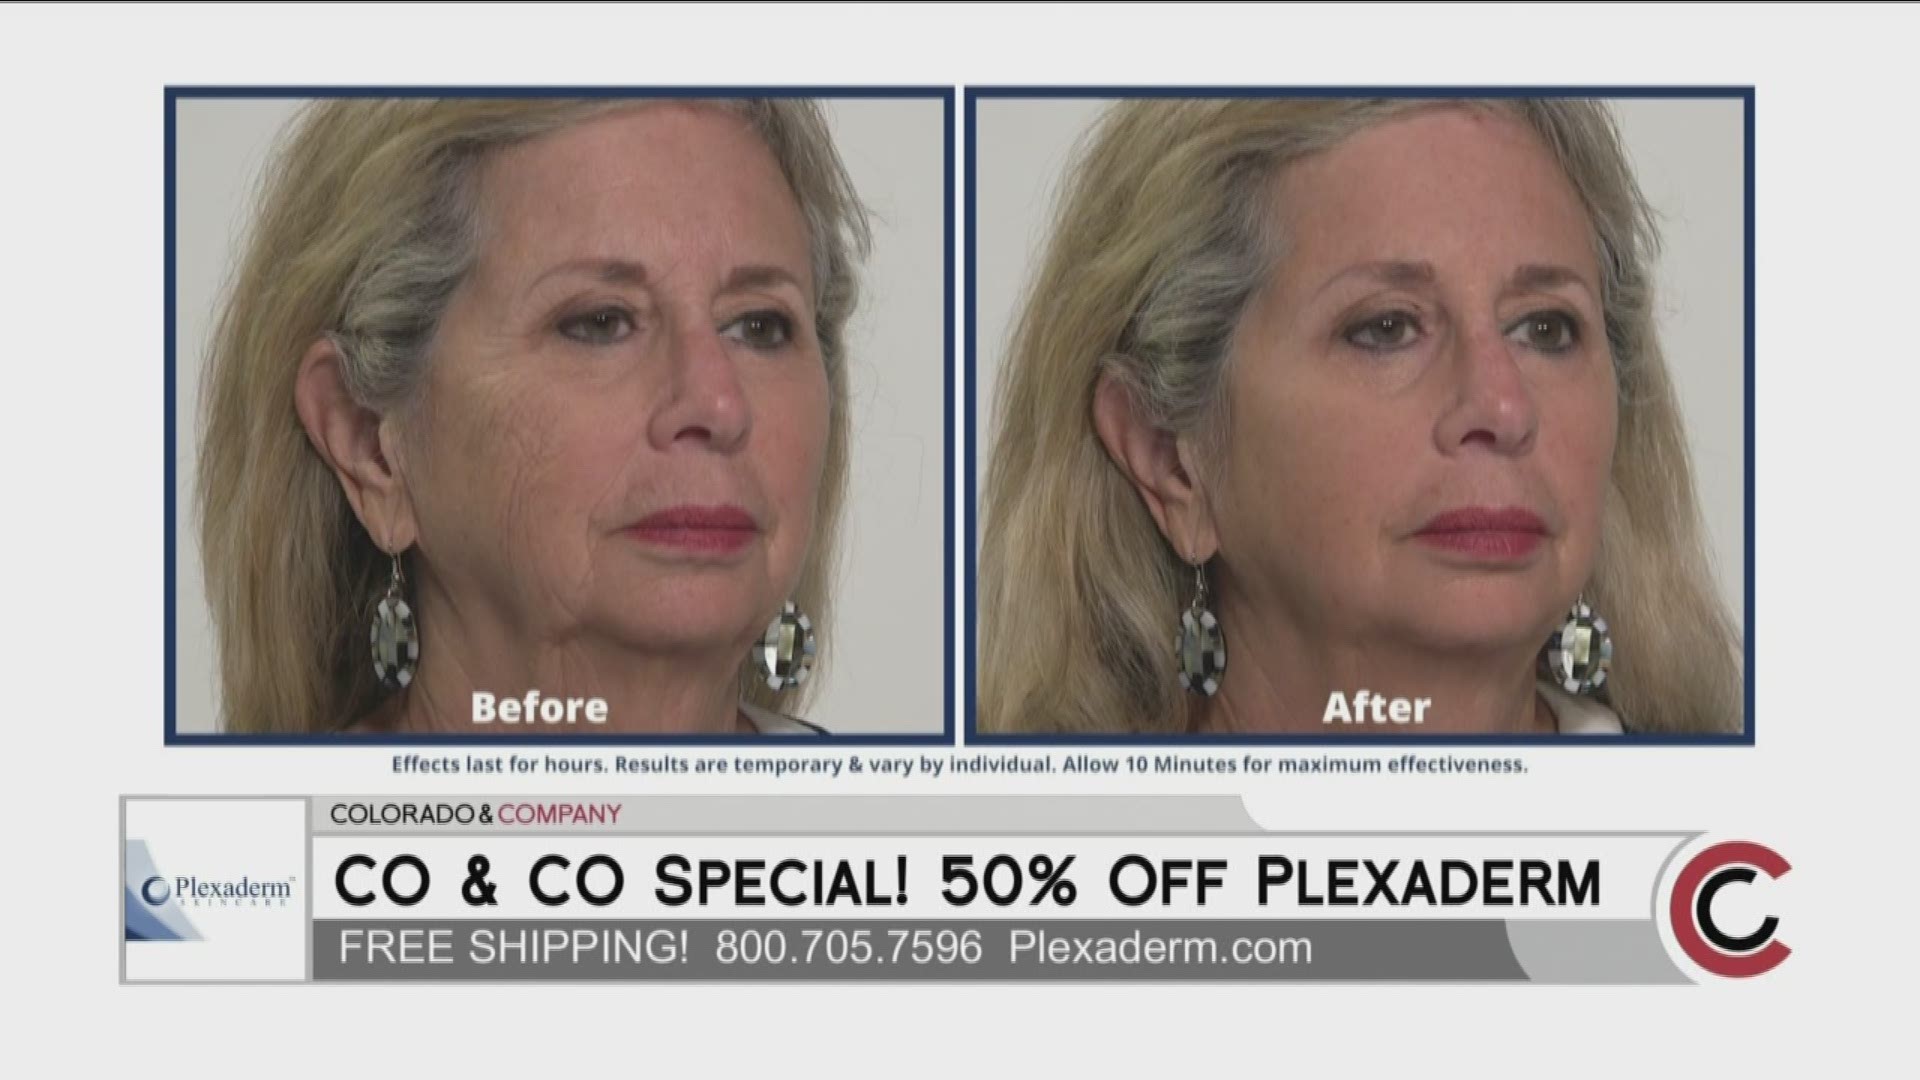 Colorado and Company viewers can get Plexaderm for up to 50% off with free shipping. Order yours online at www.Plexaderm.com